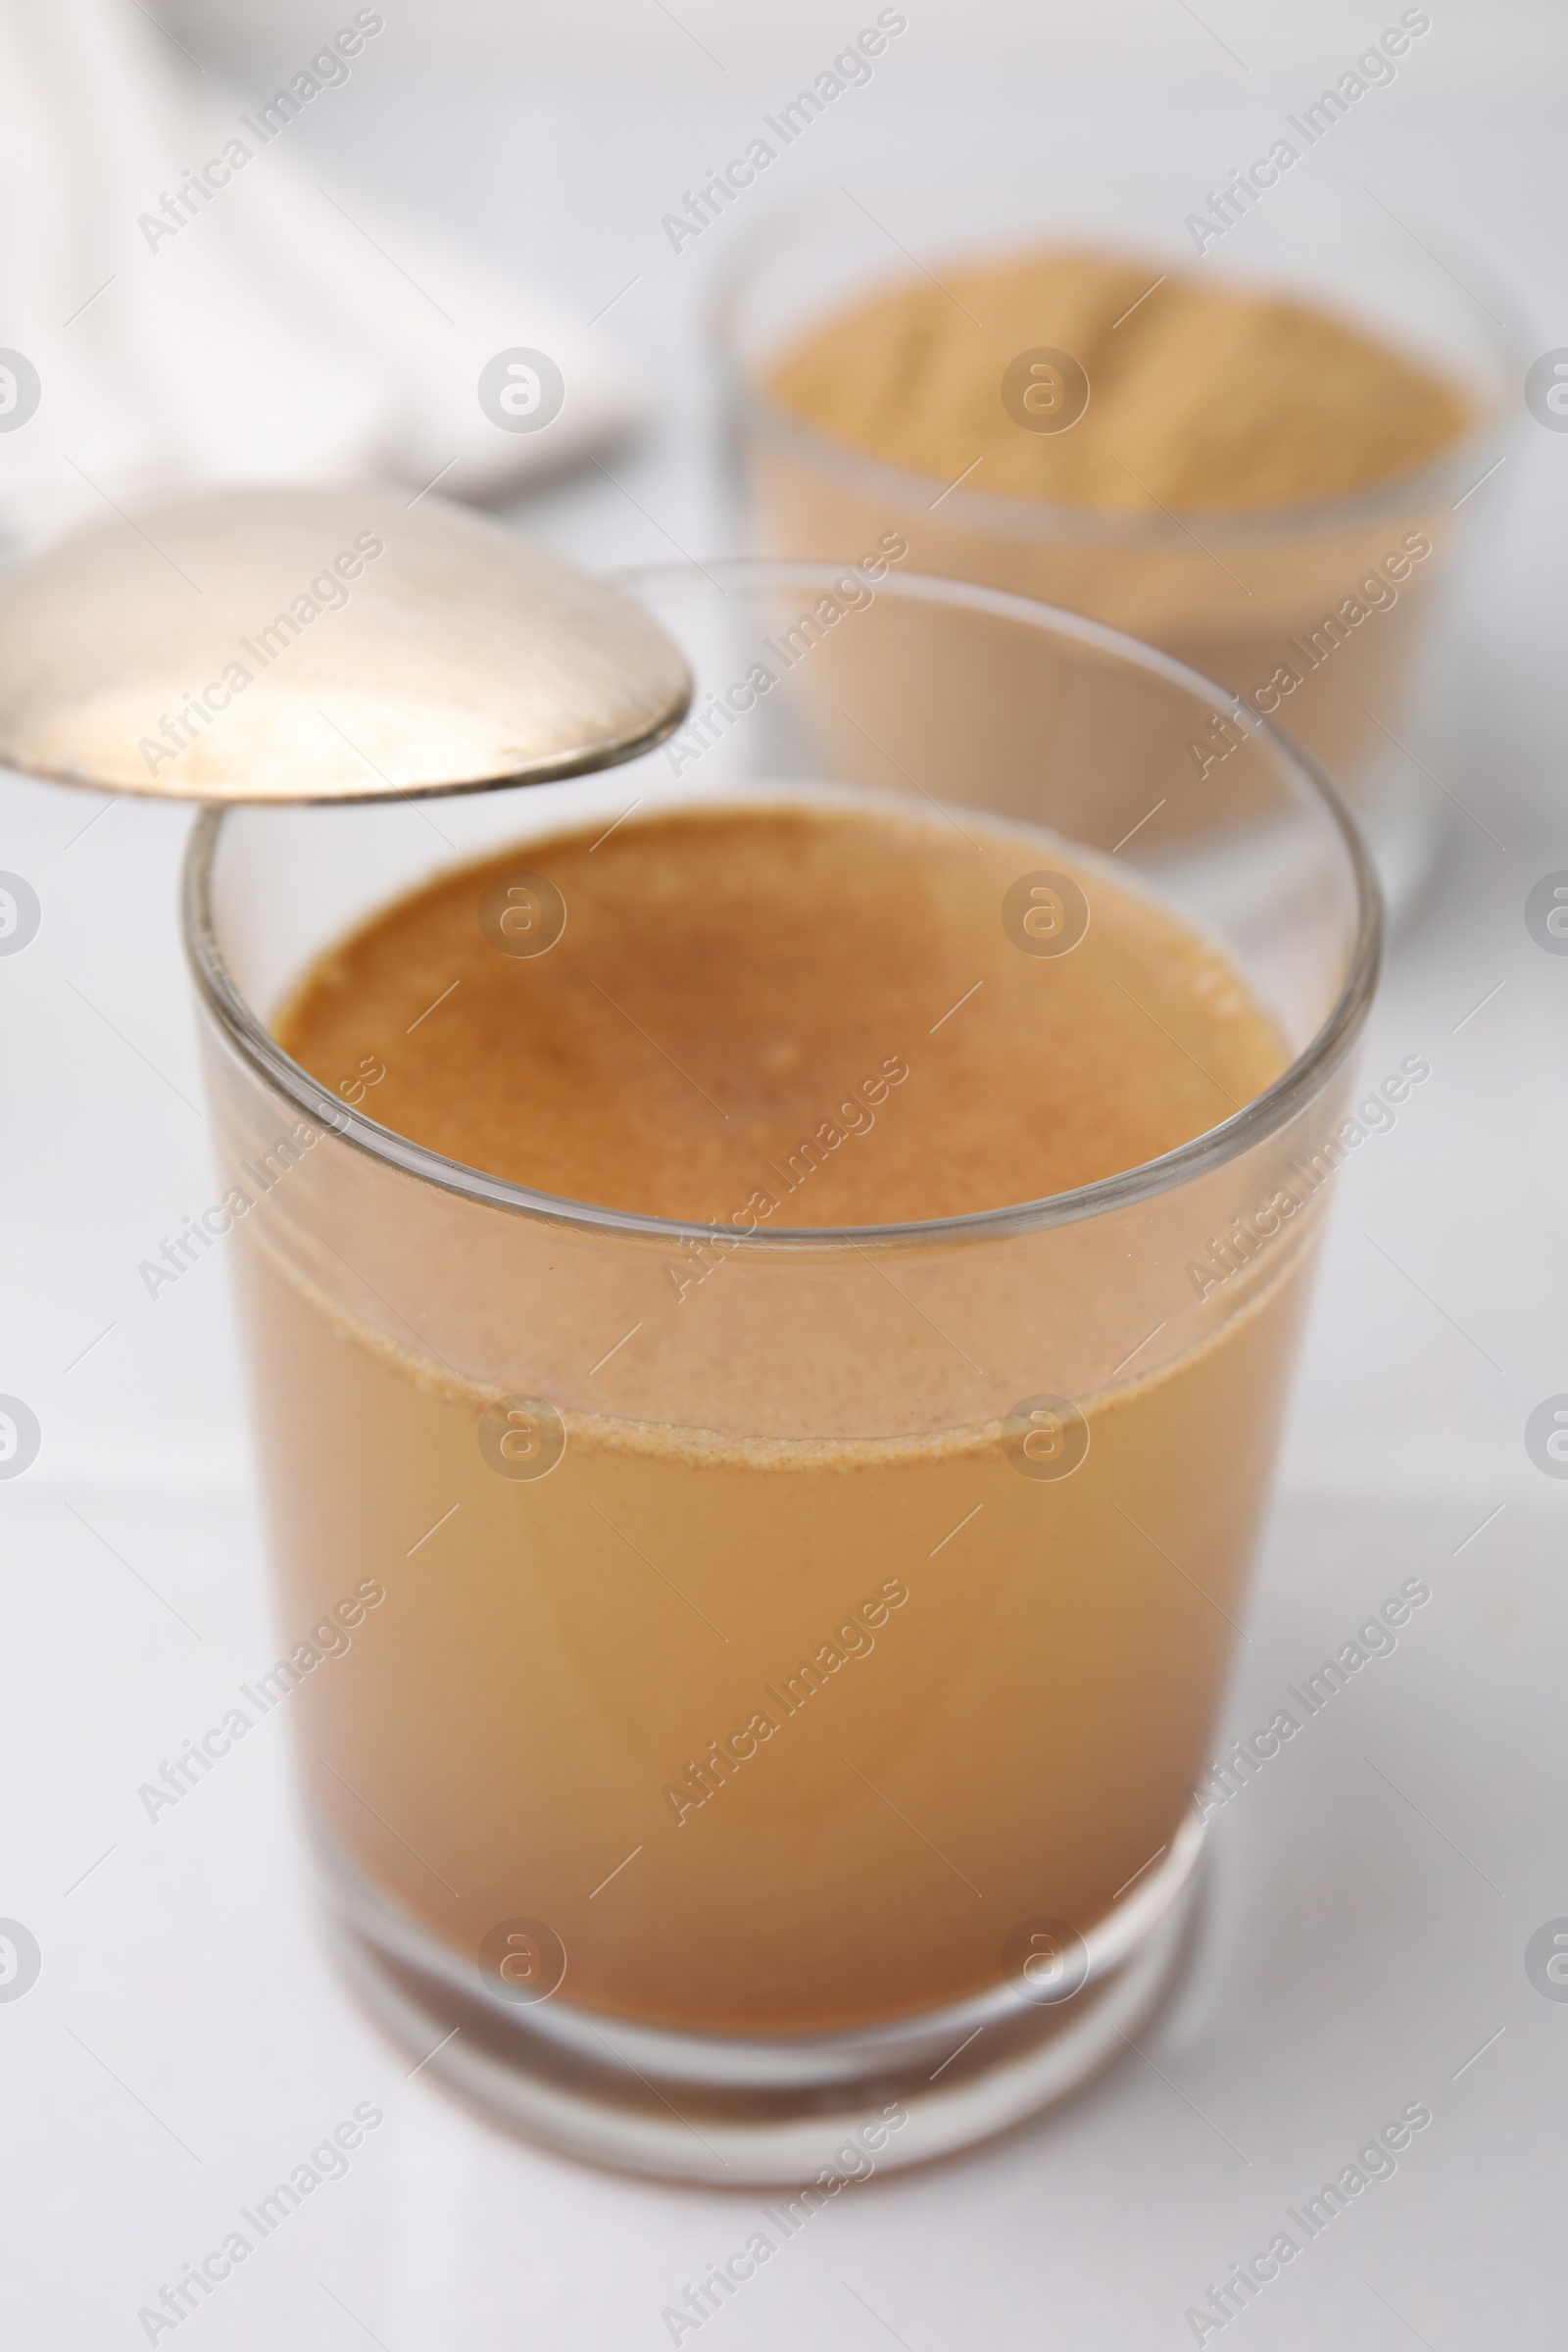 Photo of Soluble fiber with water in glass and powder on white table, closeup